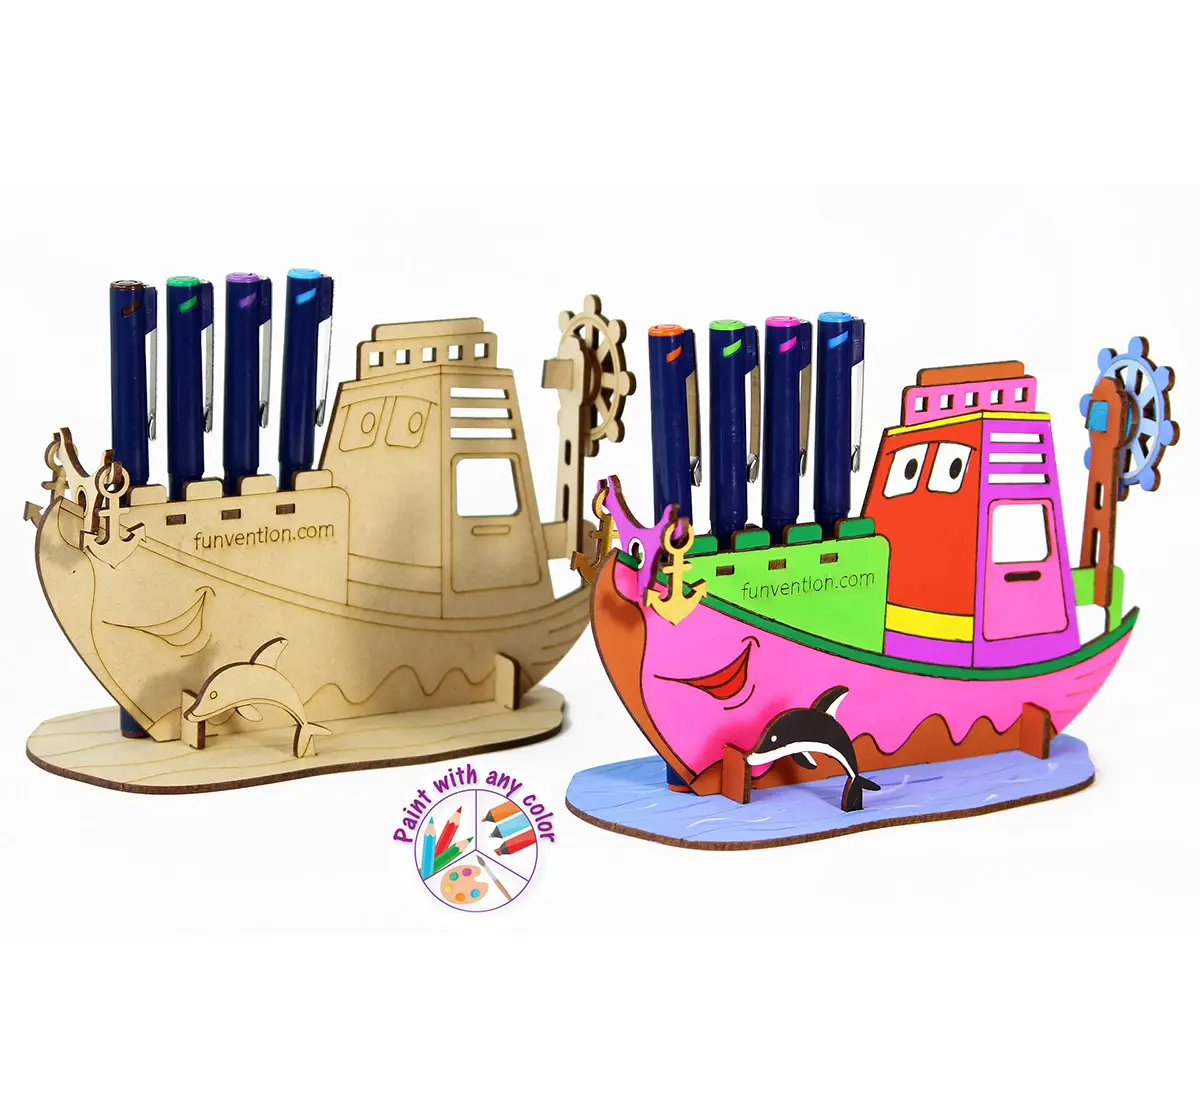 Funvention 3D Coloring Model - Ship Stem for Kids Age 5Y+